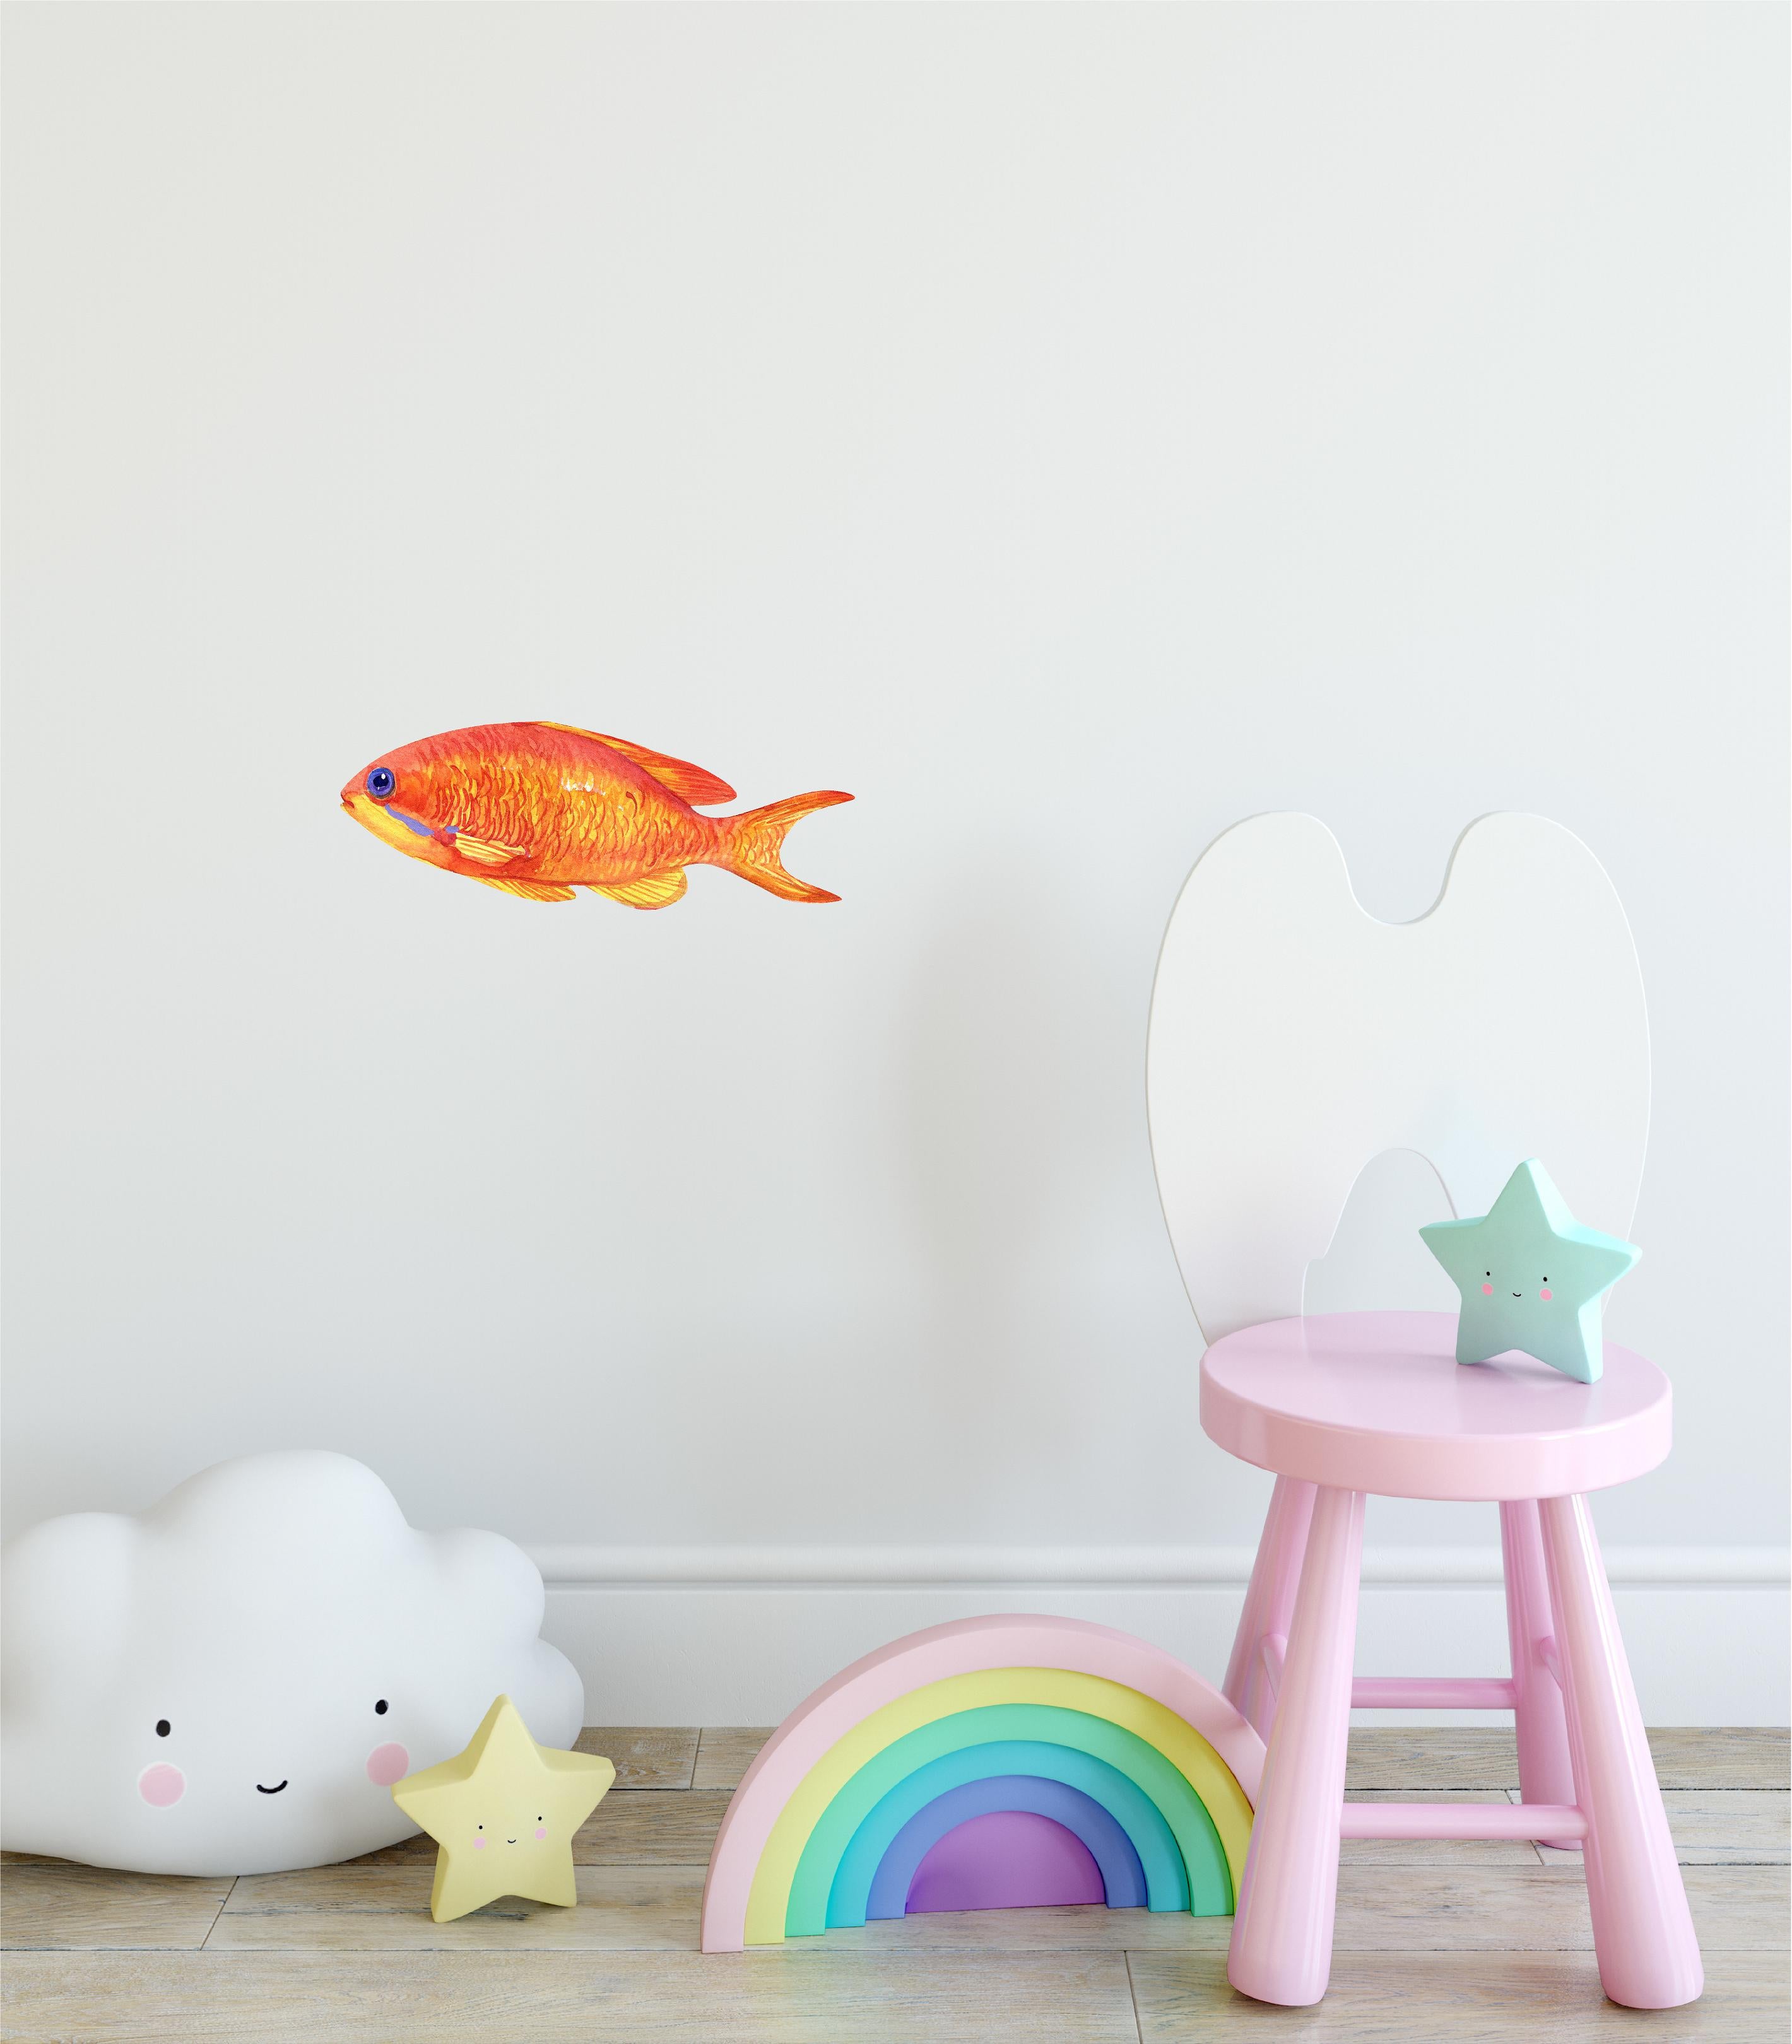 Sea Goldie Fish Wall Decal Watercolor Ocean Marine Fish Wall Sticker | DecalBaby